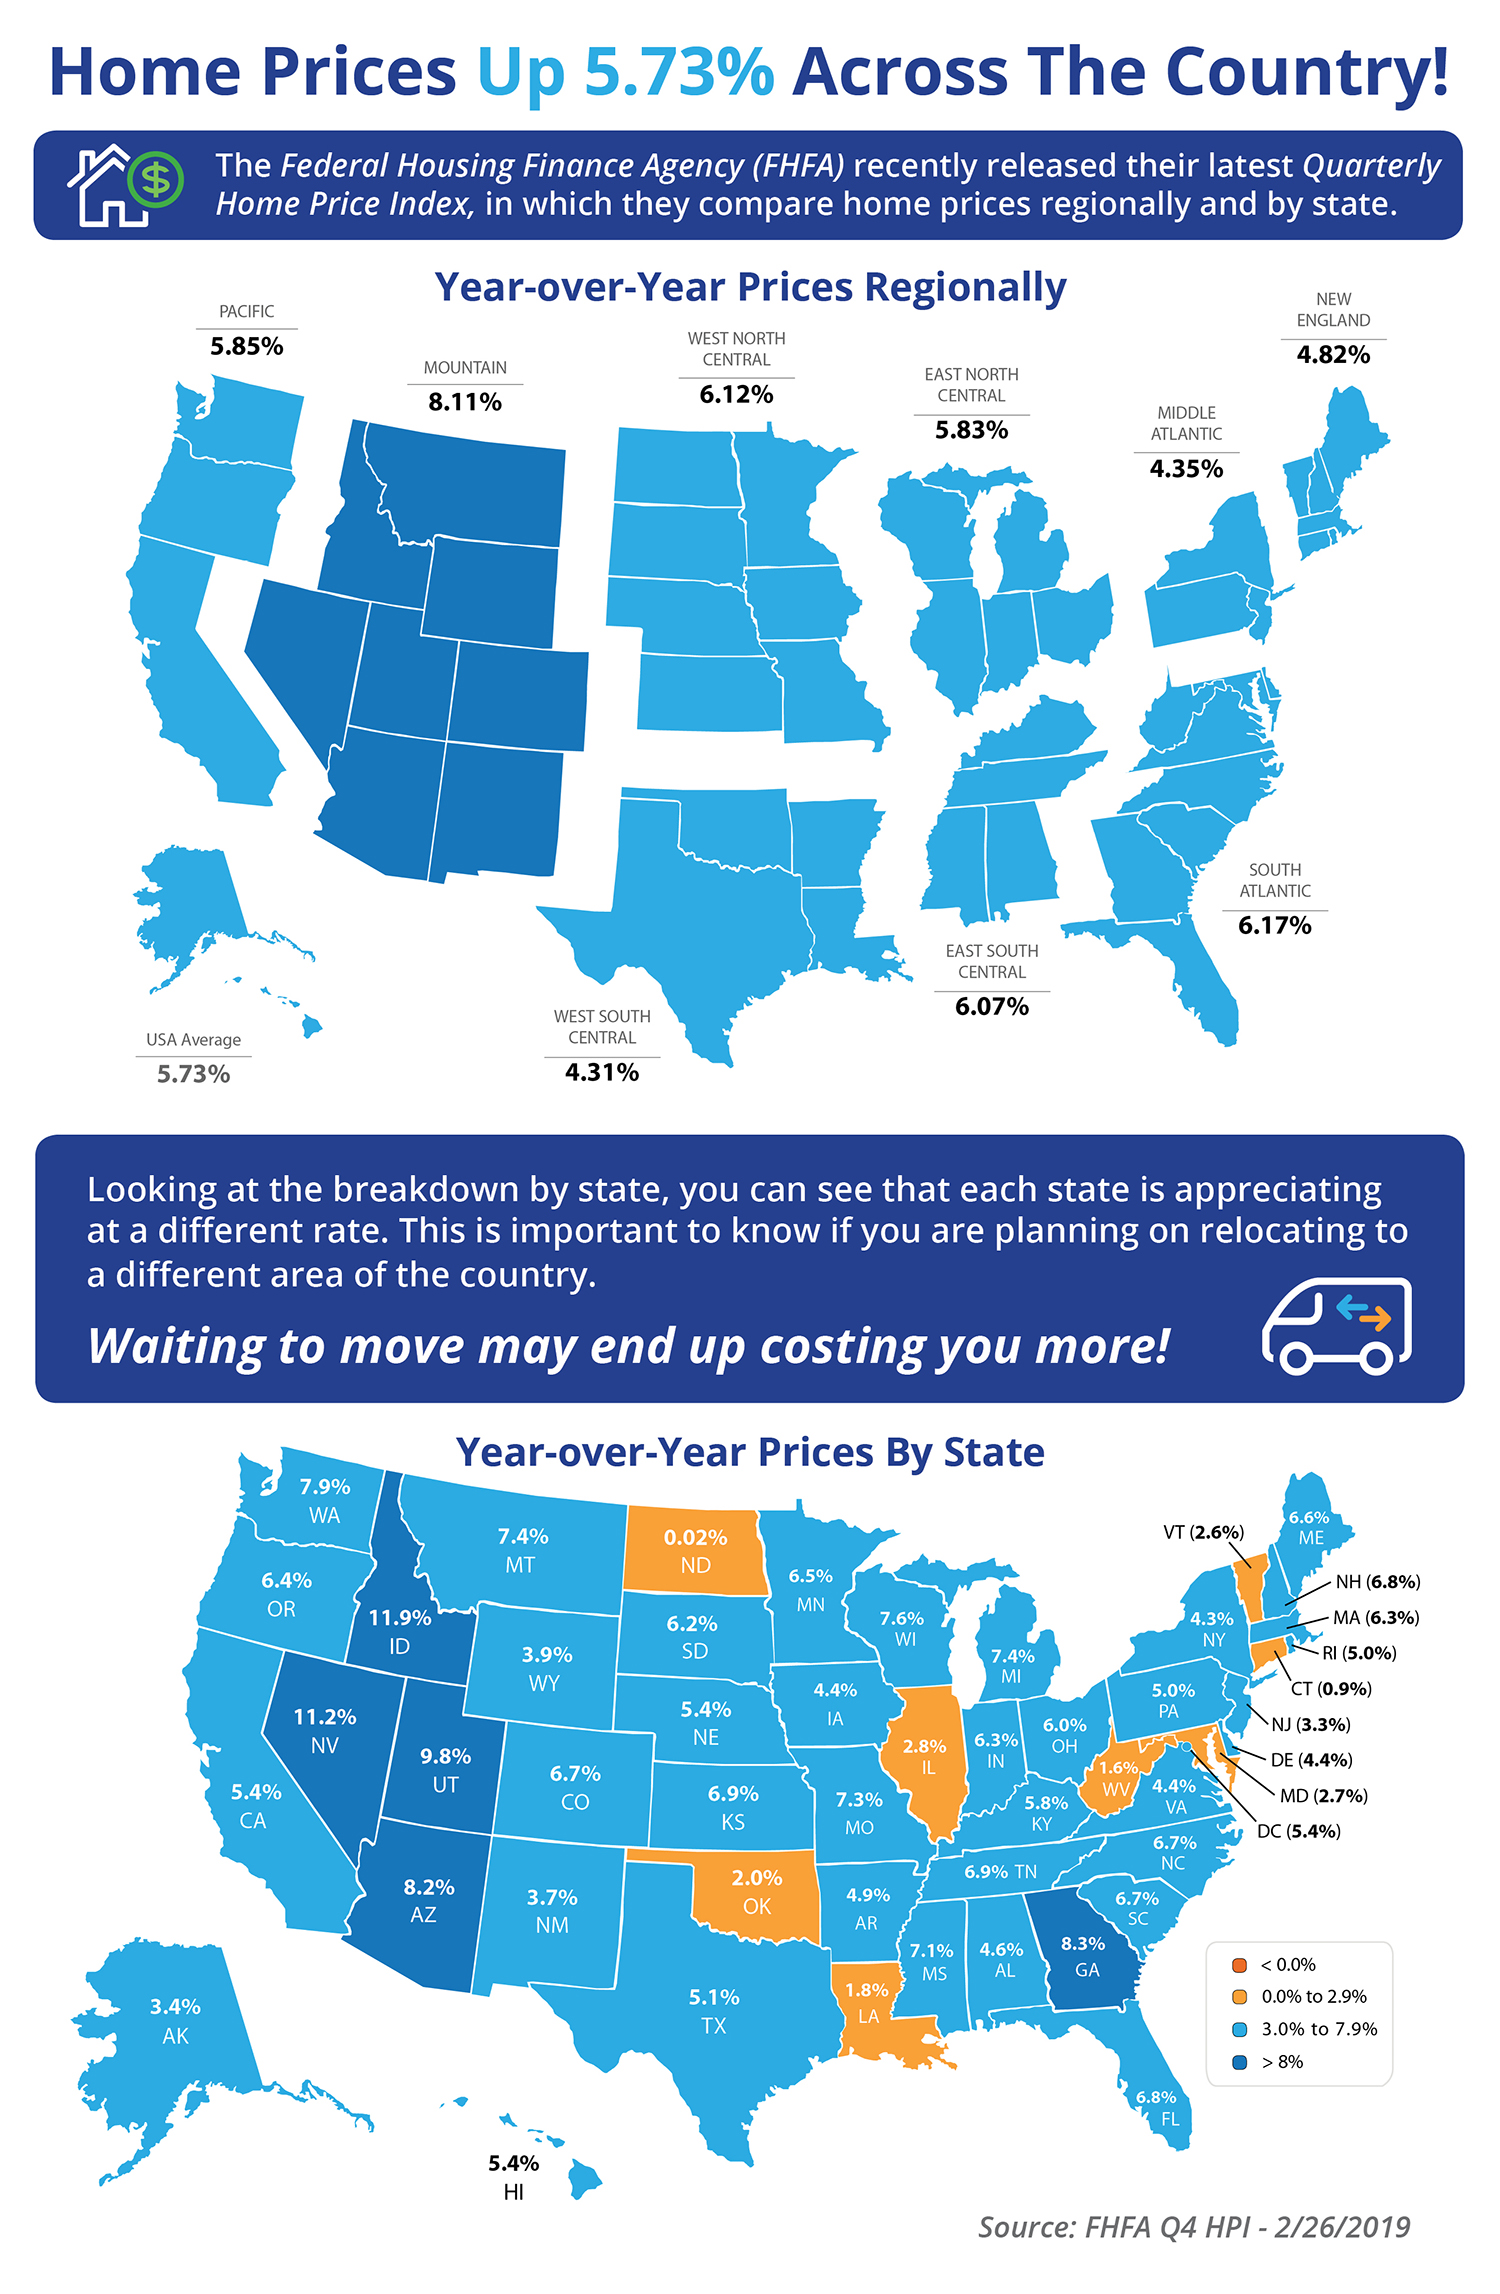 Home Prices Up 5.73% Across the Country! [INFOGRAPHIC] | Simplifying The Market